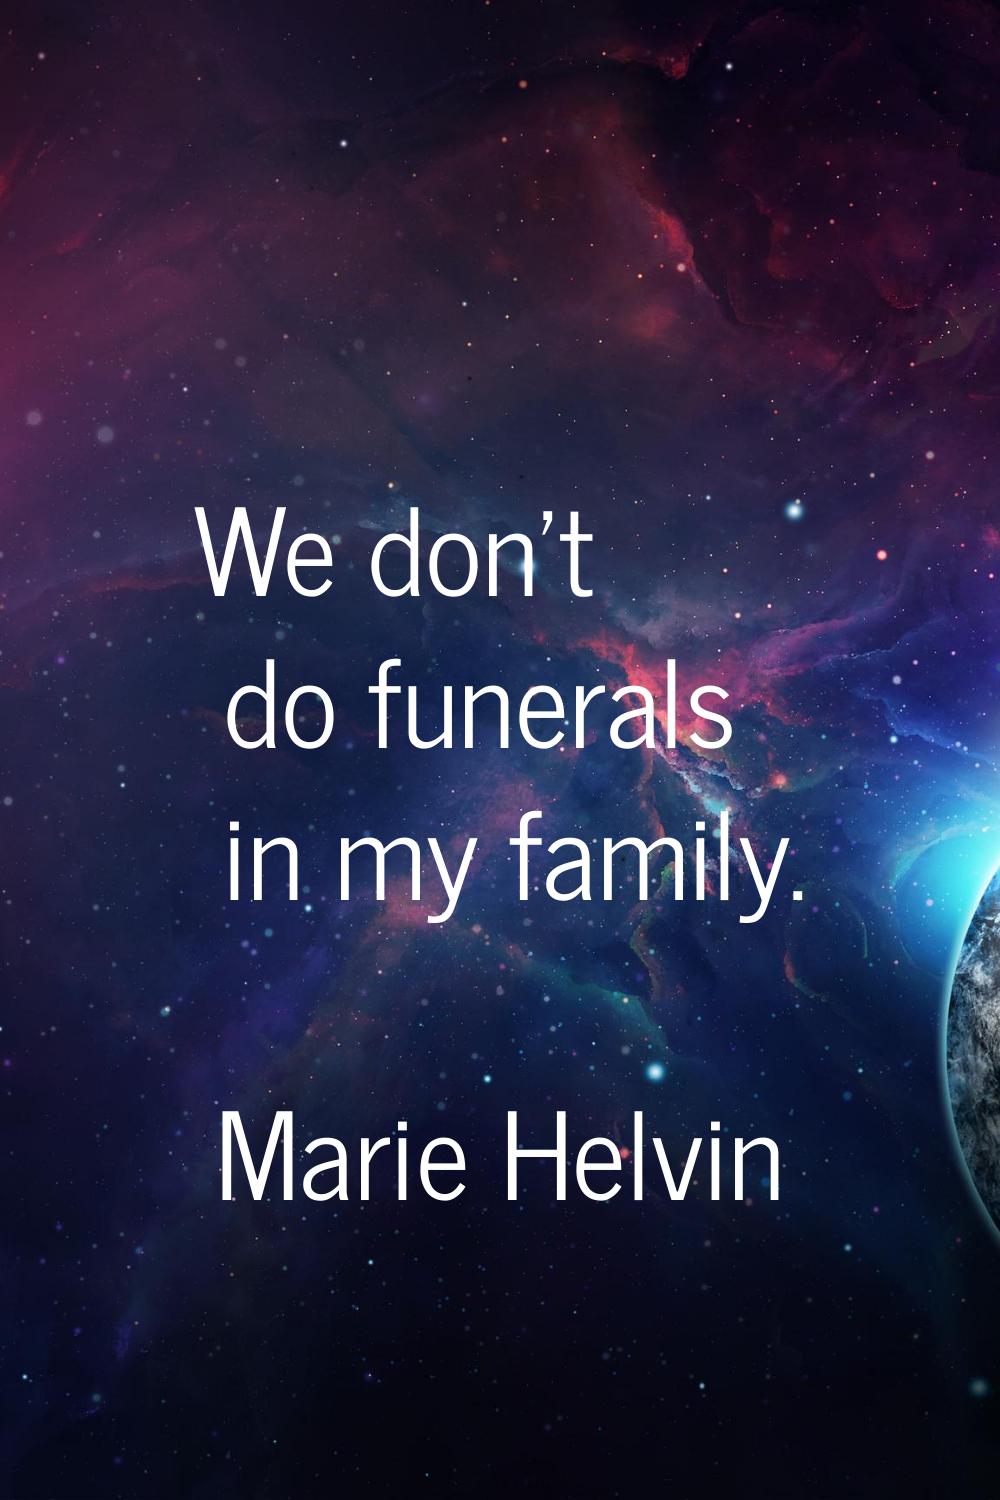 We don't do funerals in my family.